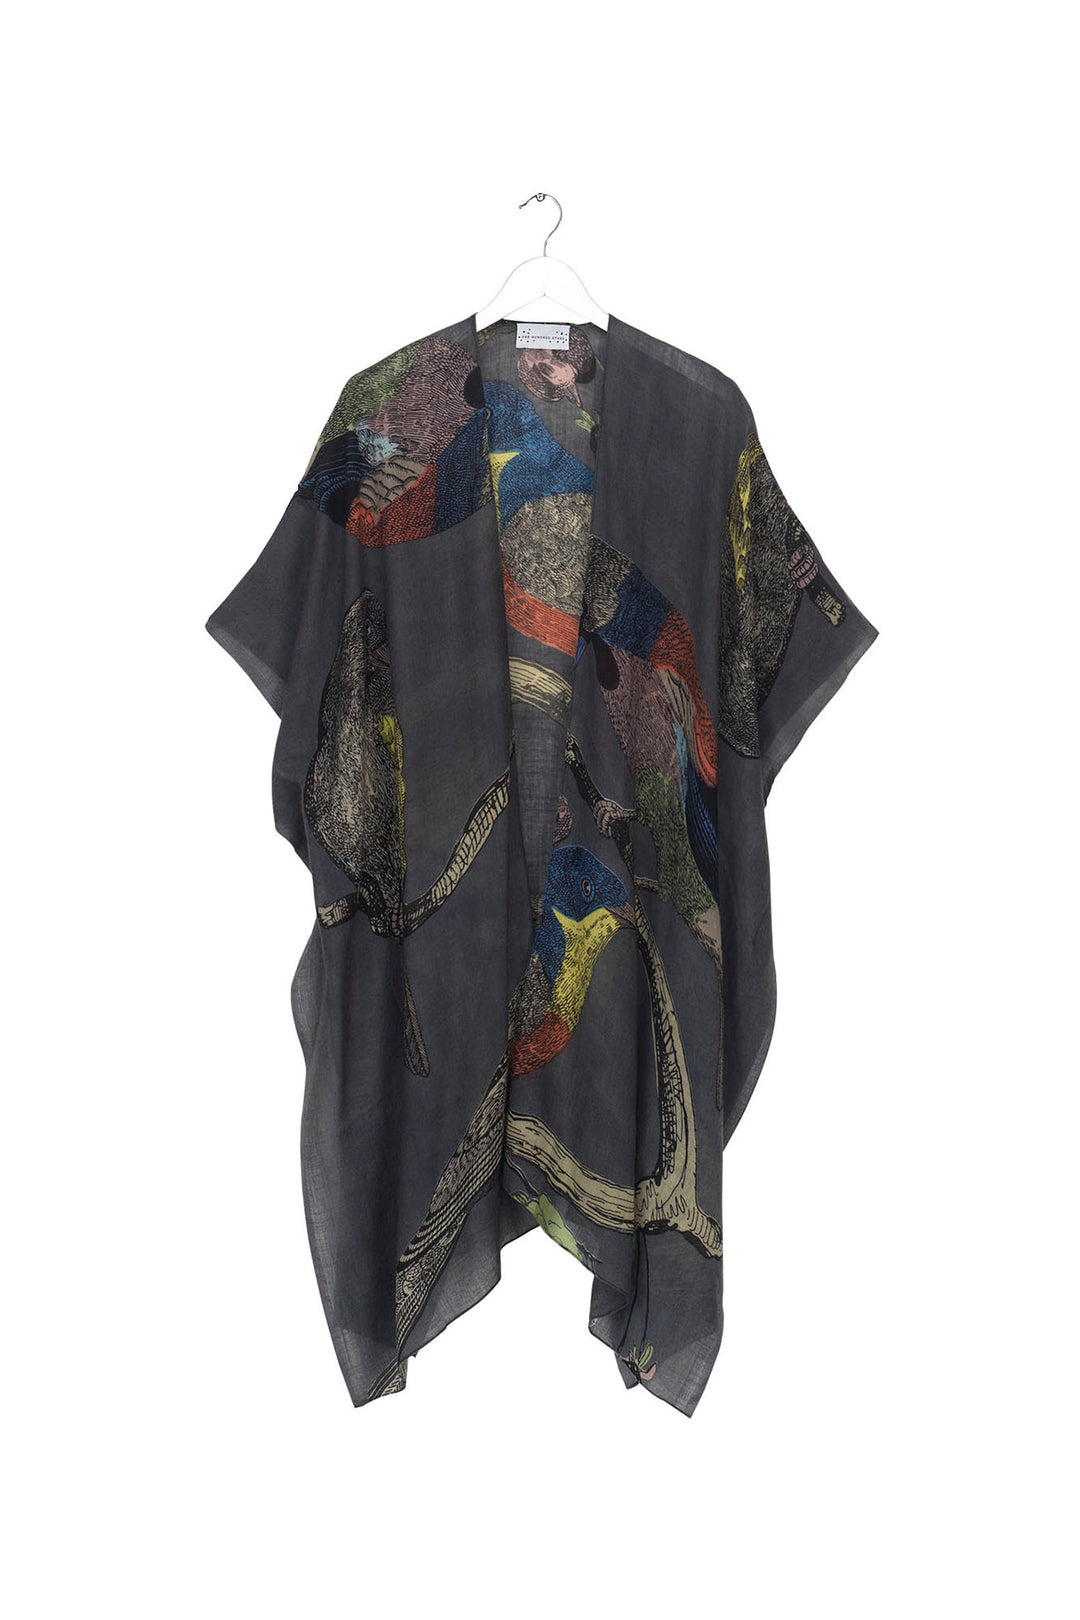 winter wool throwover ladies shawl kaftan with a colourful bird print on a dark grey background by One Hundred Stars